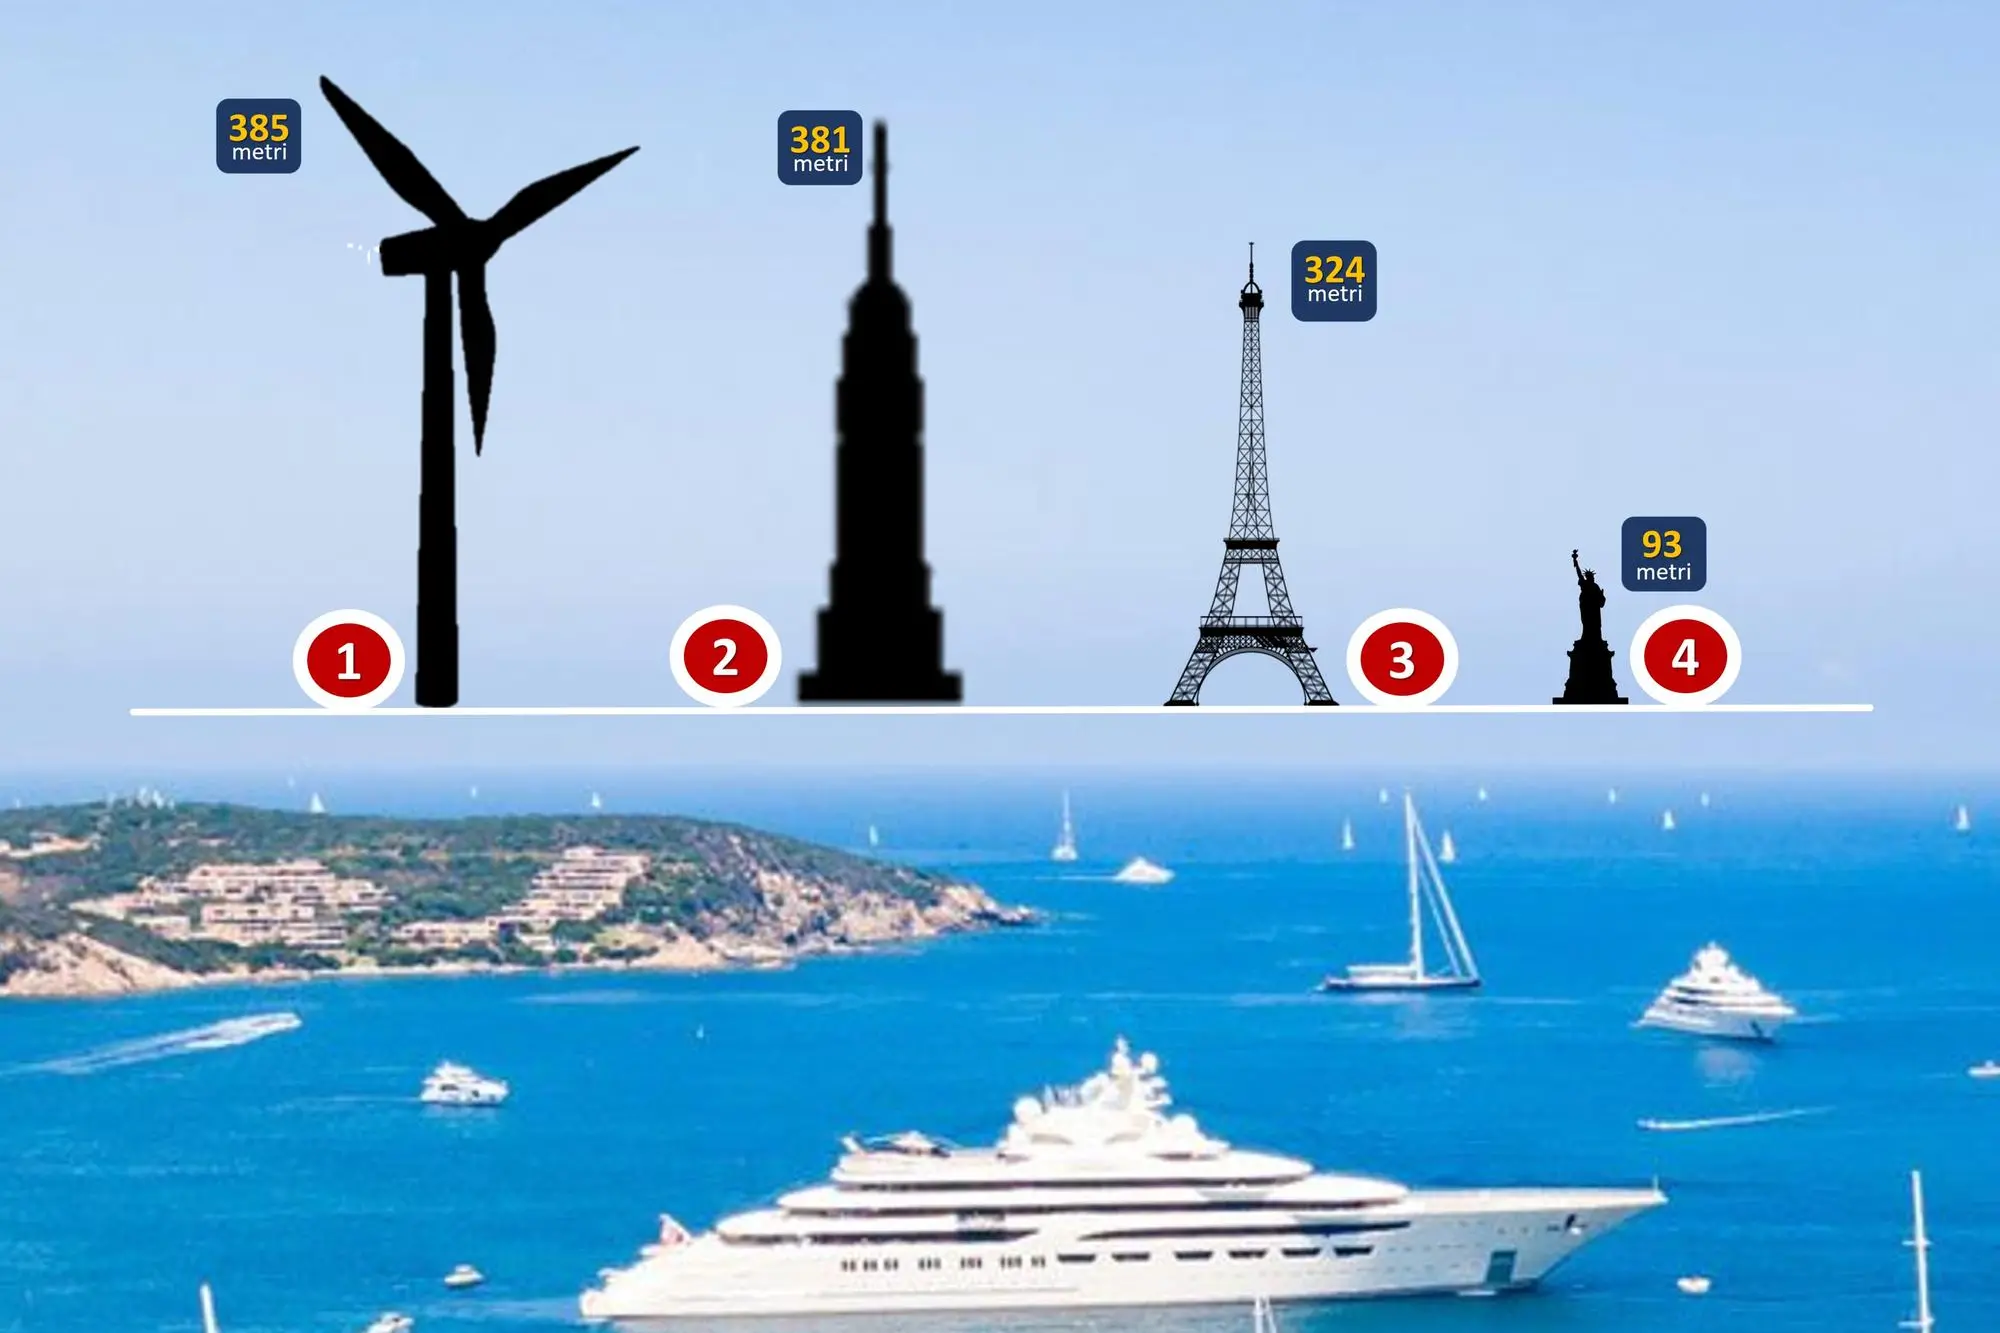 The comparison between the blades planned for the Costa Smeralda and some buildings famous for their height (L'Unione Sarda)